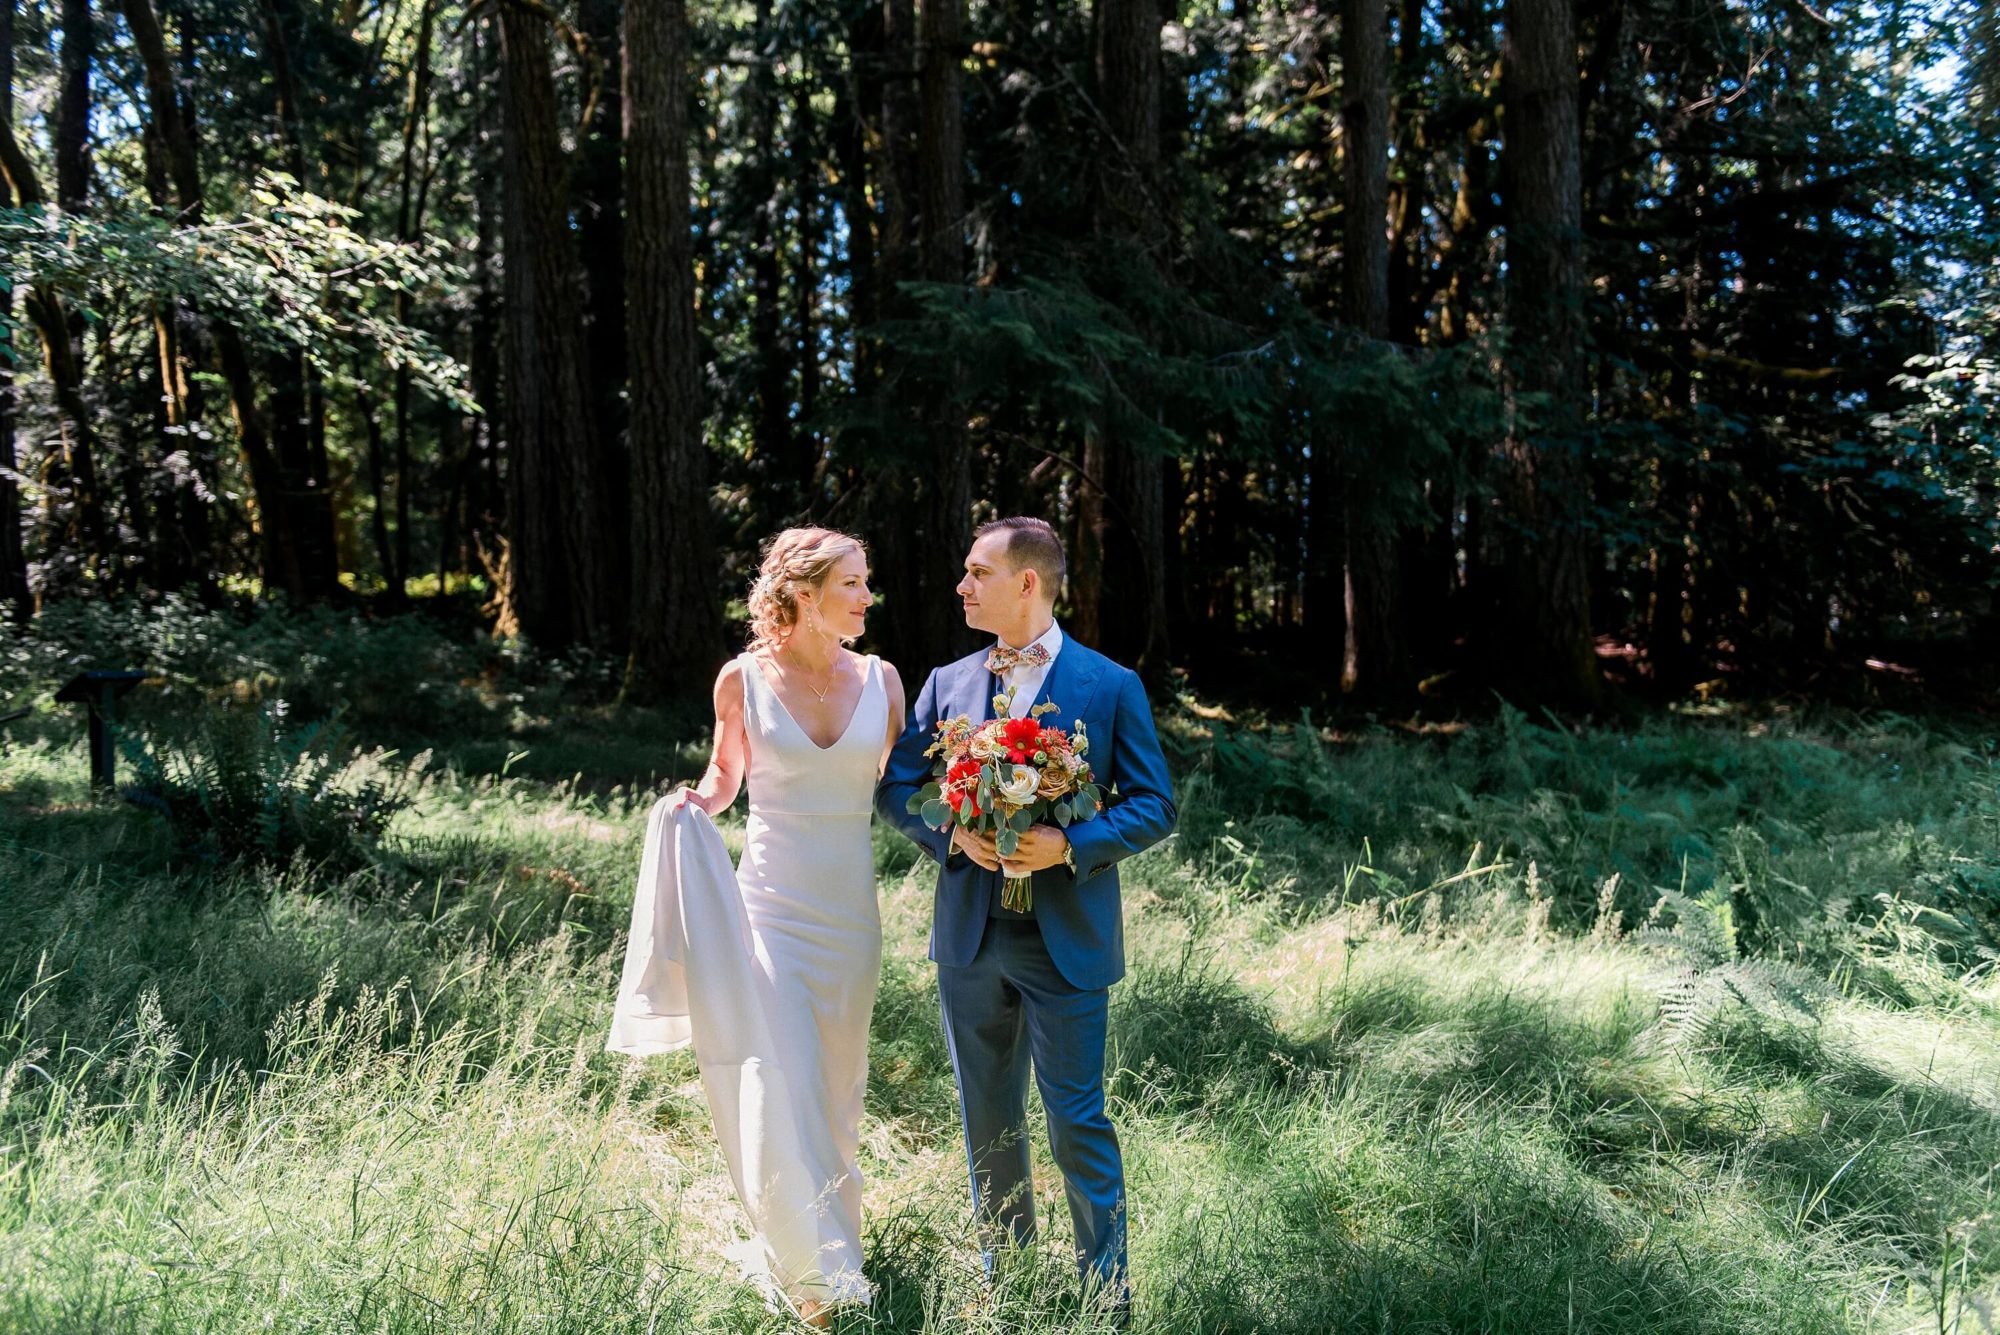 groom holding the wedding bouquet and assisting bride while walking through a field